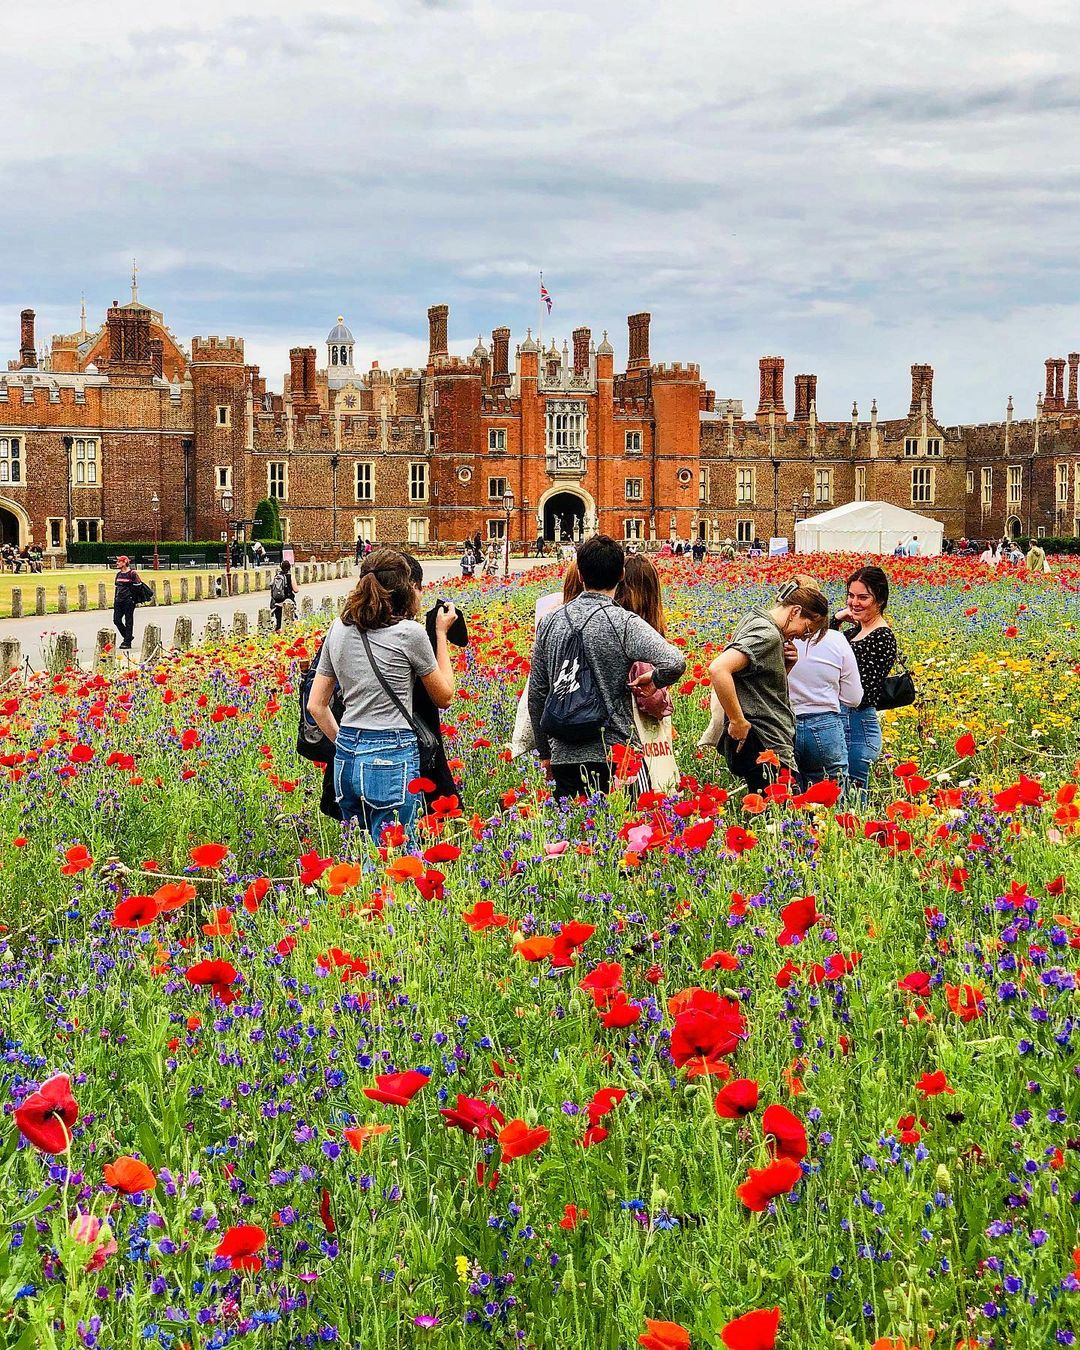 Students in the fields of flowers in front of Hampton Court Palace.